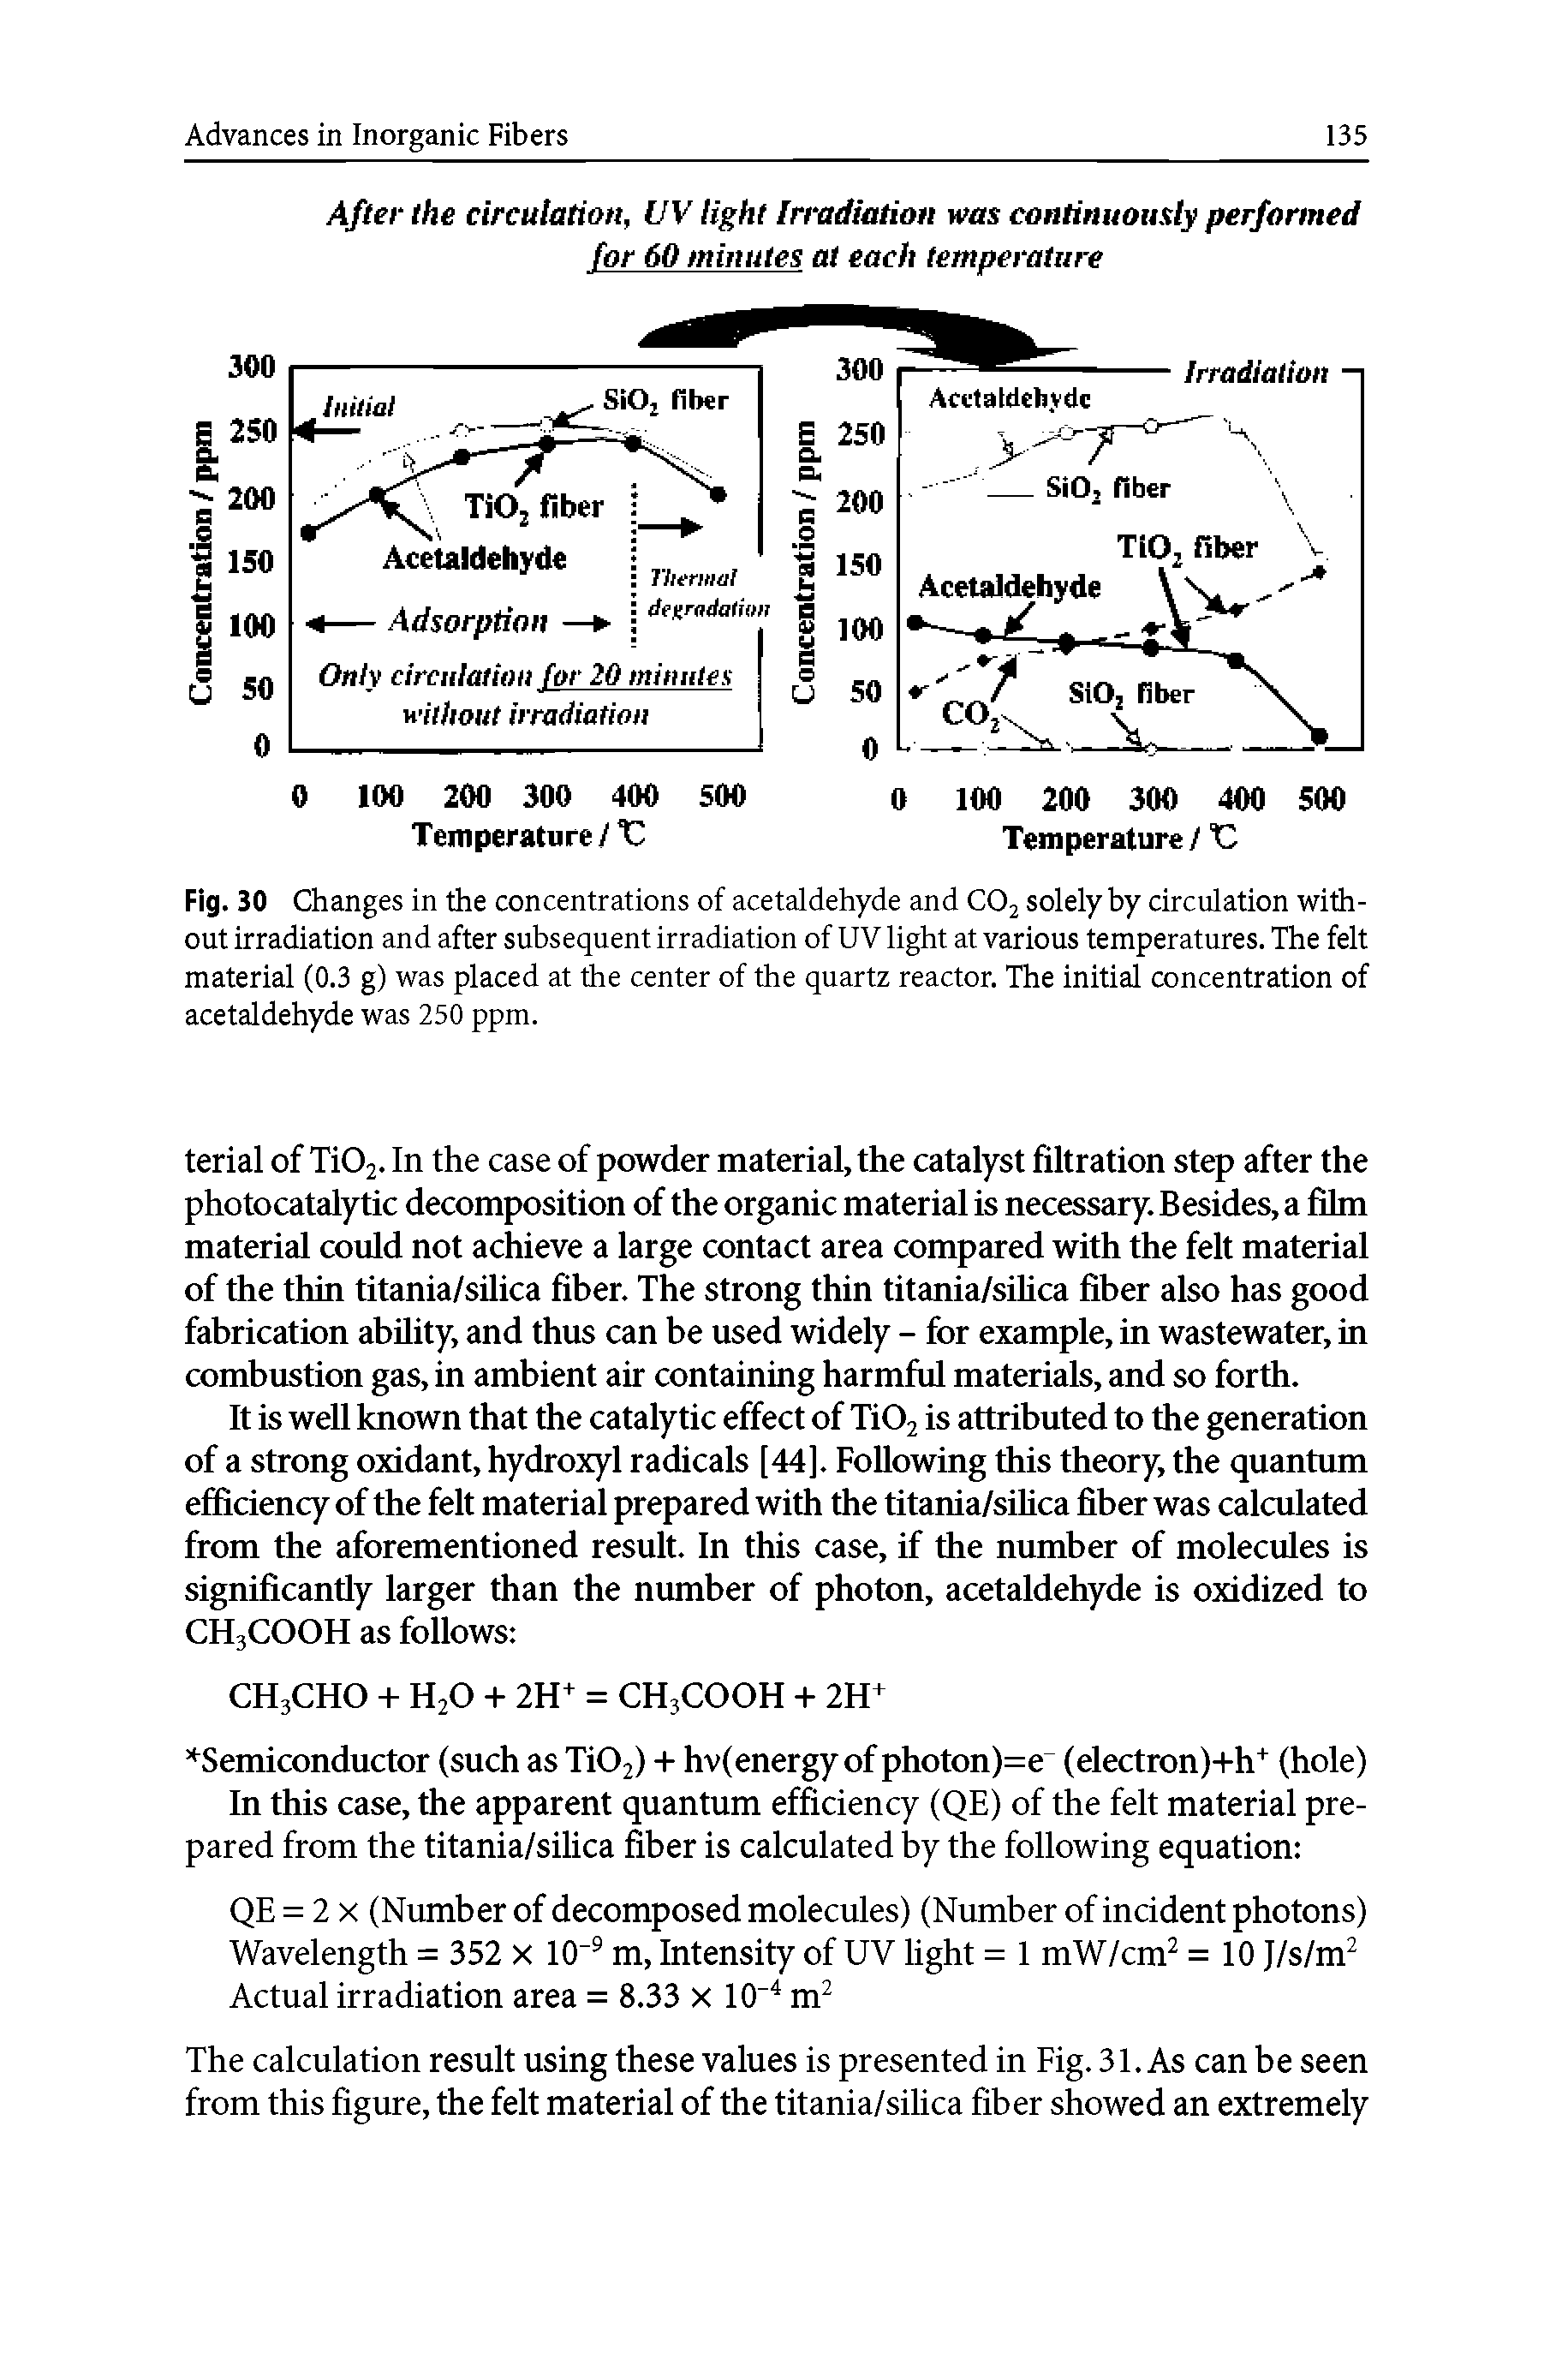 Fig. 30 Changes in the concentrations of acetaldehyde and C02 solely by circulation without irradiation and after subsequent irradiation of UV light at various temperatures. The felt material (0.3 g) was placed at the center of the quartz reactor. The initial concentration of acetaldehyde was 250 ppm.